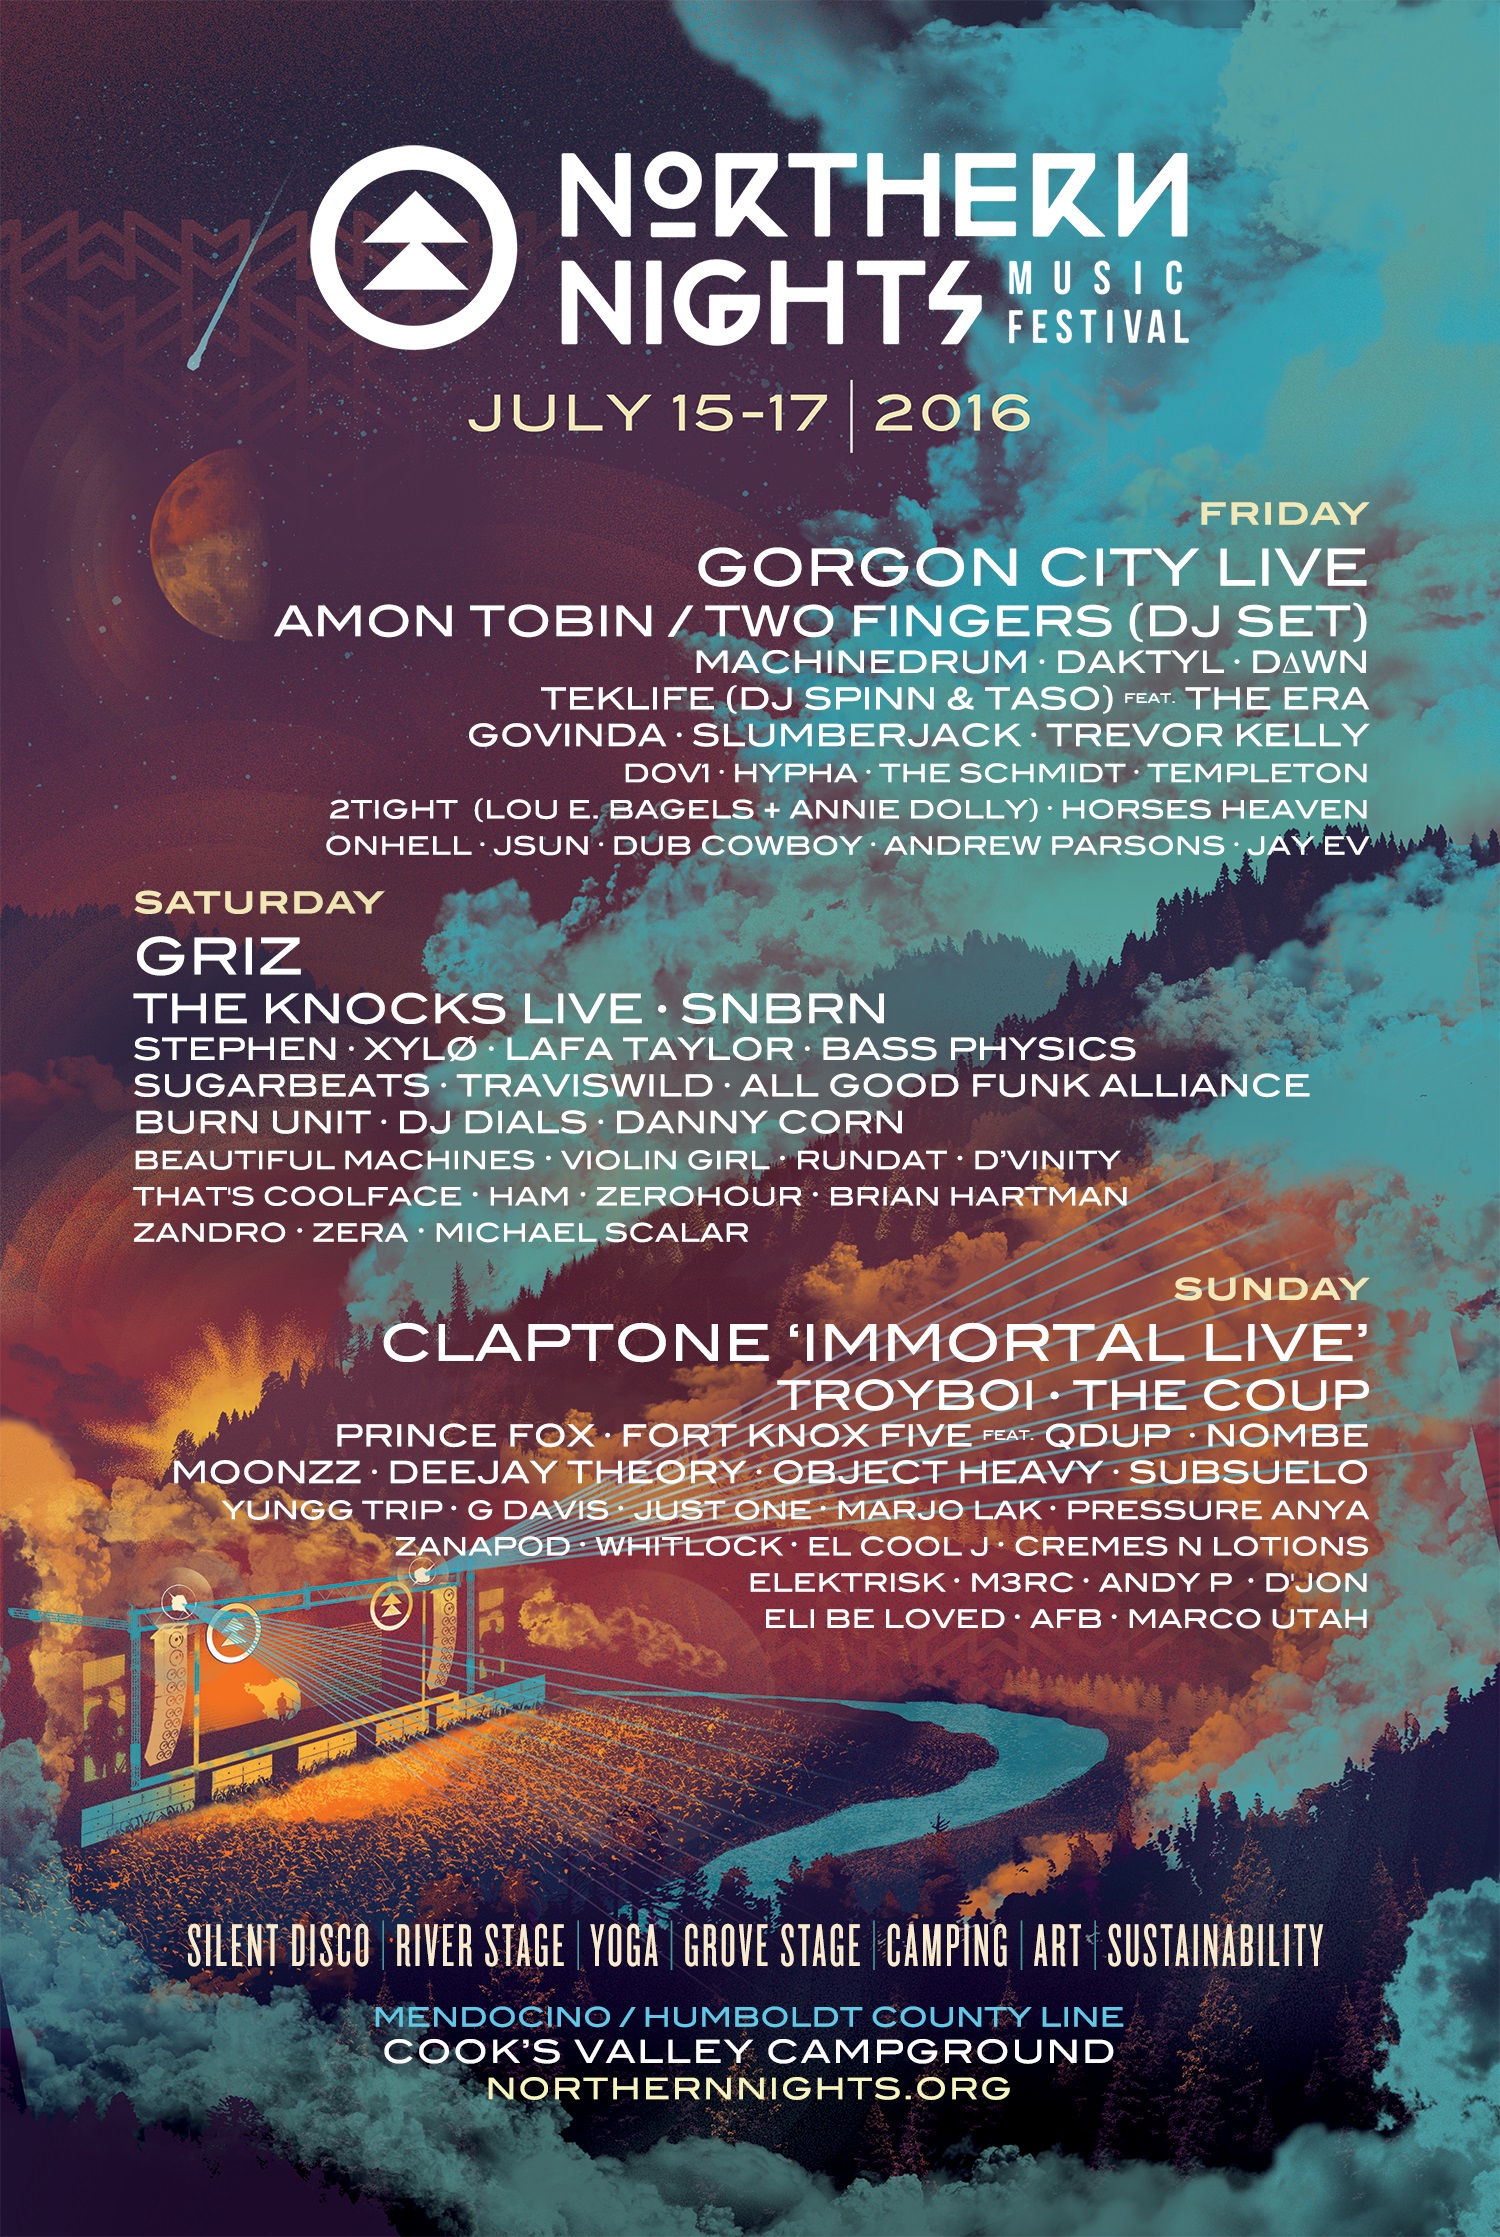 Northern Nights Announces Phase 2 Lineup